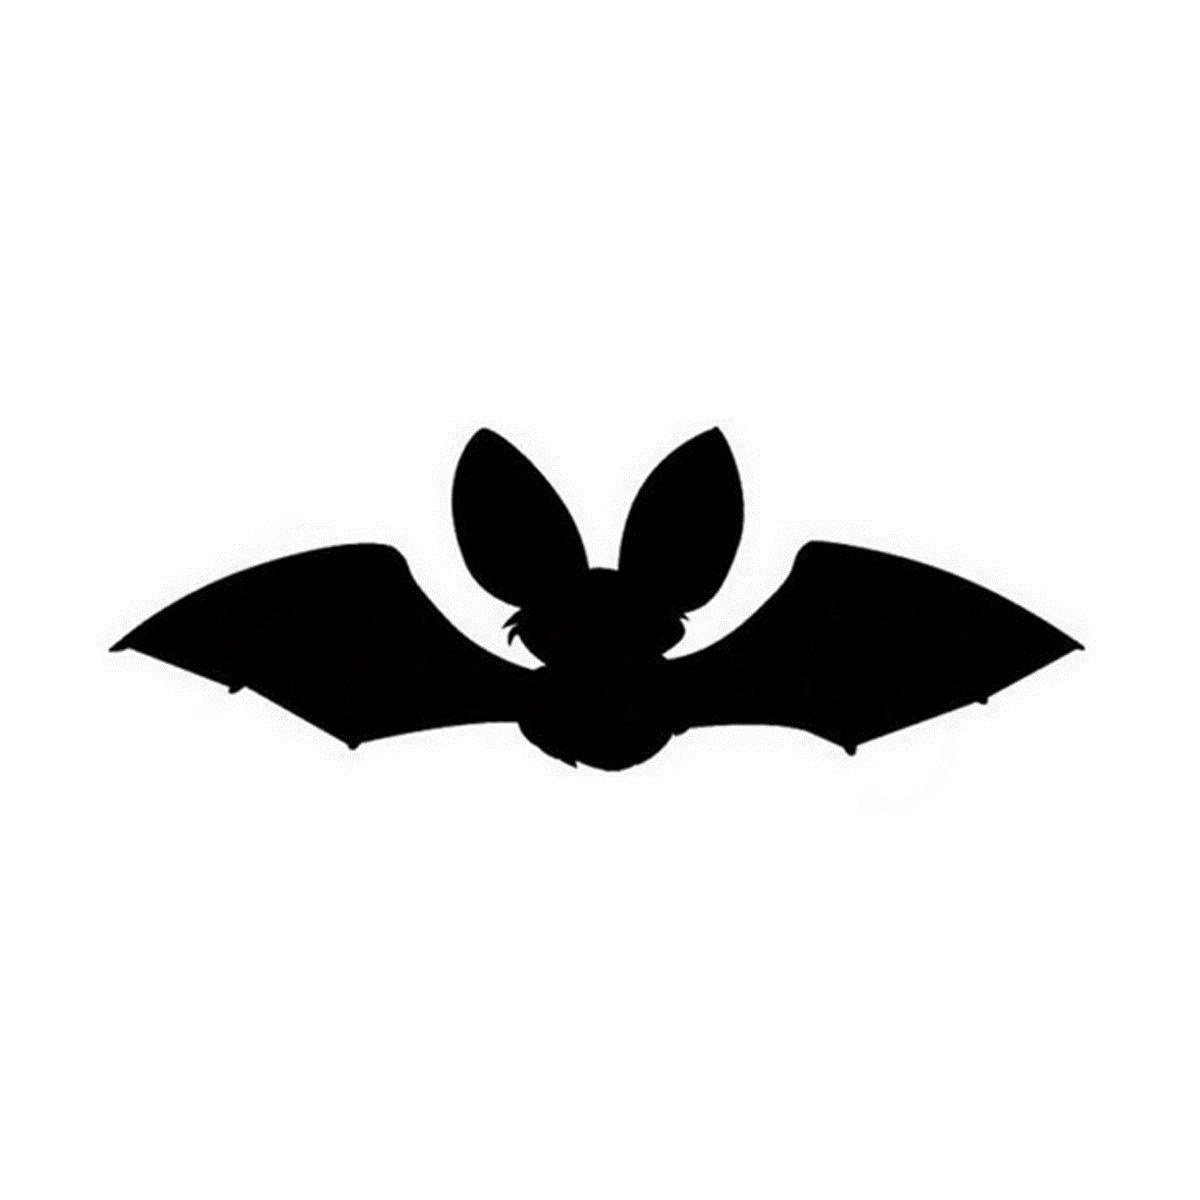 Bat Silhouette Images for Logo - Online Shop Cute Baby Bat Silhouette Cartoon Car Styling Wall Home